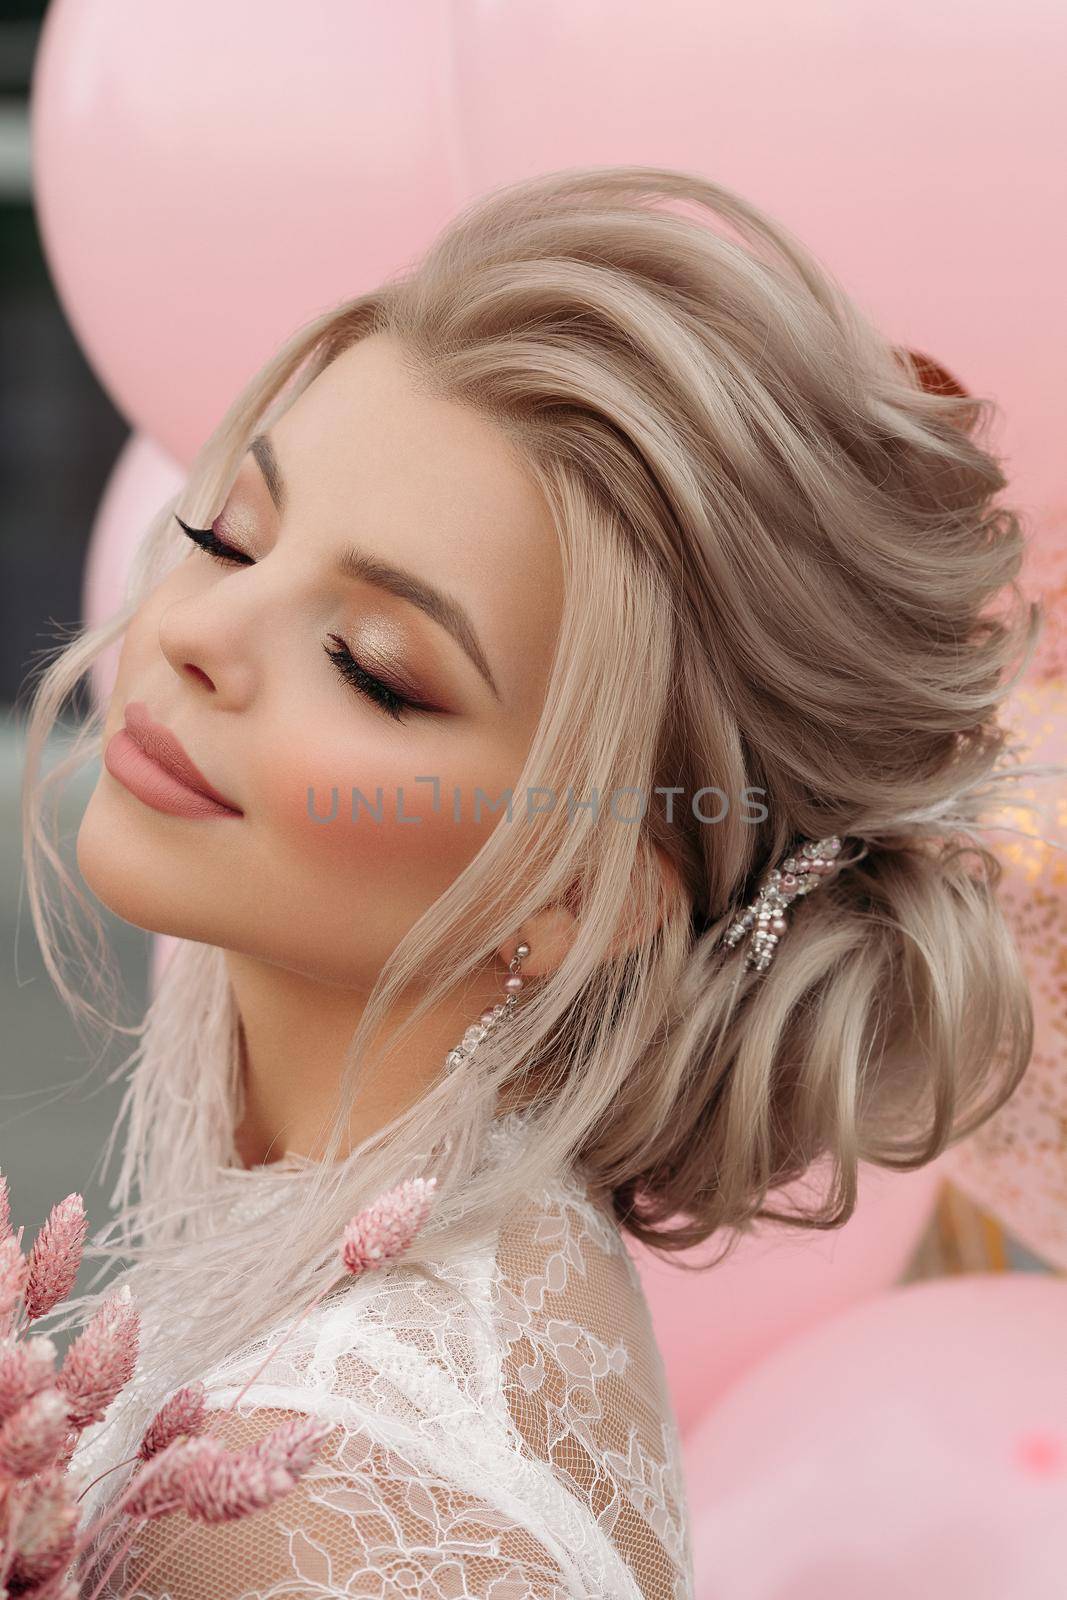 Fashion portrait of stunning blonde girl with hairstyle and professional make up in white transparent blouse holding bunch of pink colored flowers. Bunch of pink air balloons in background.